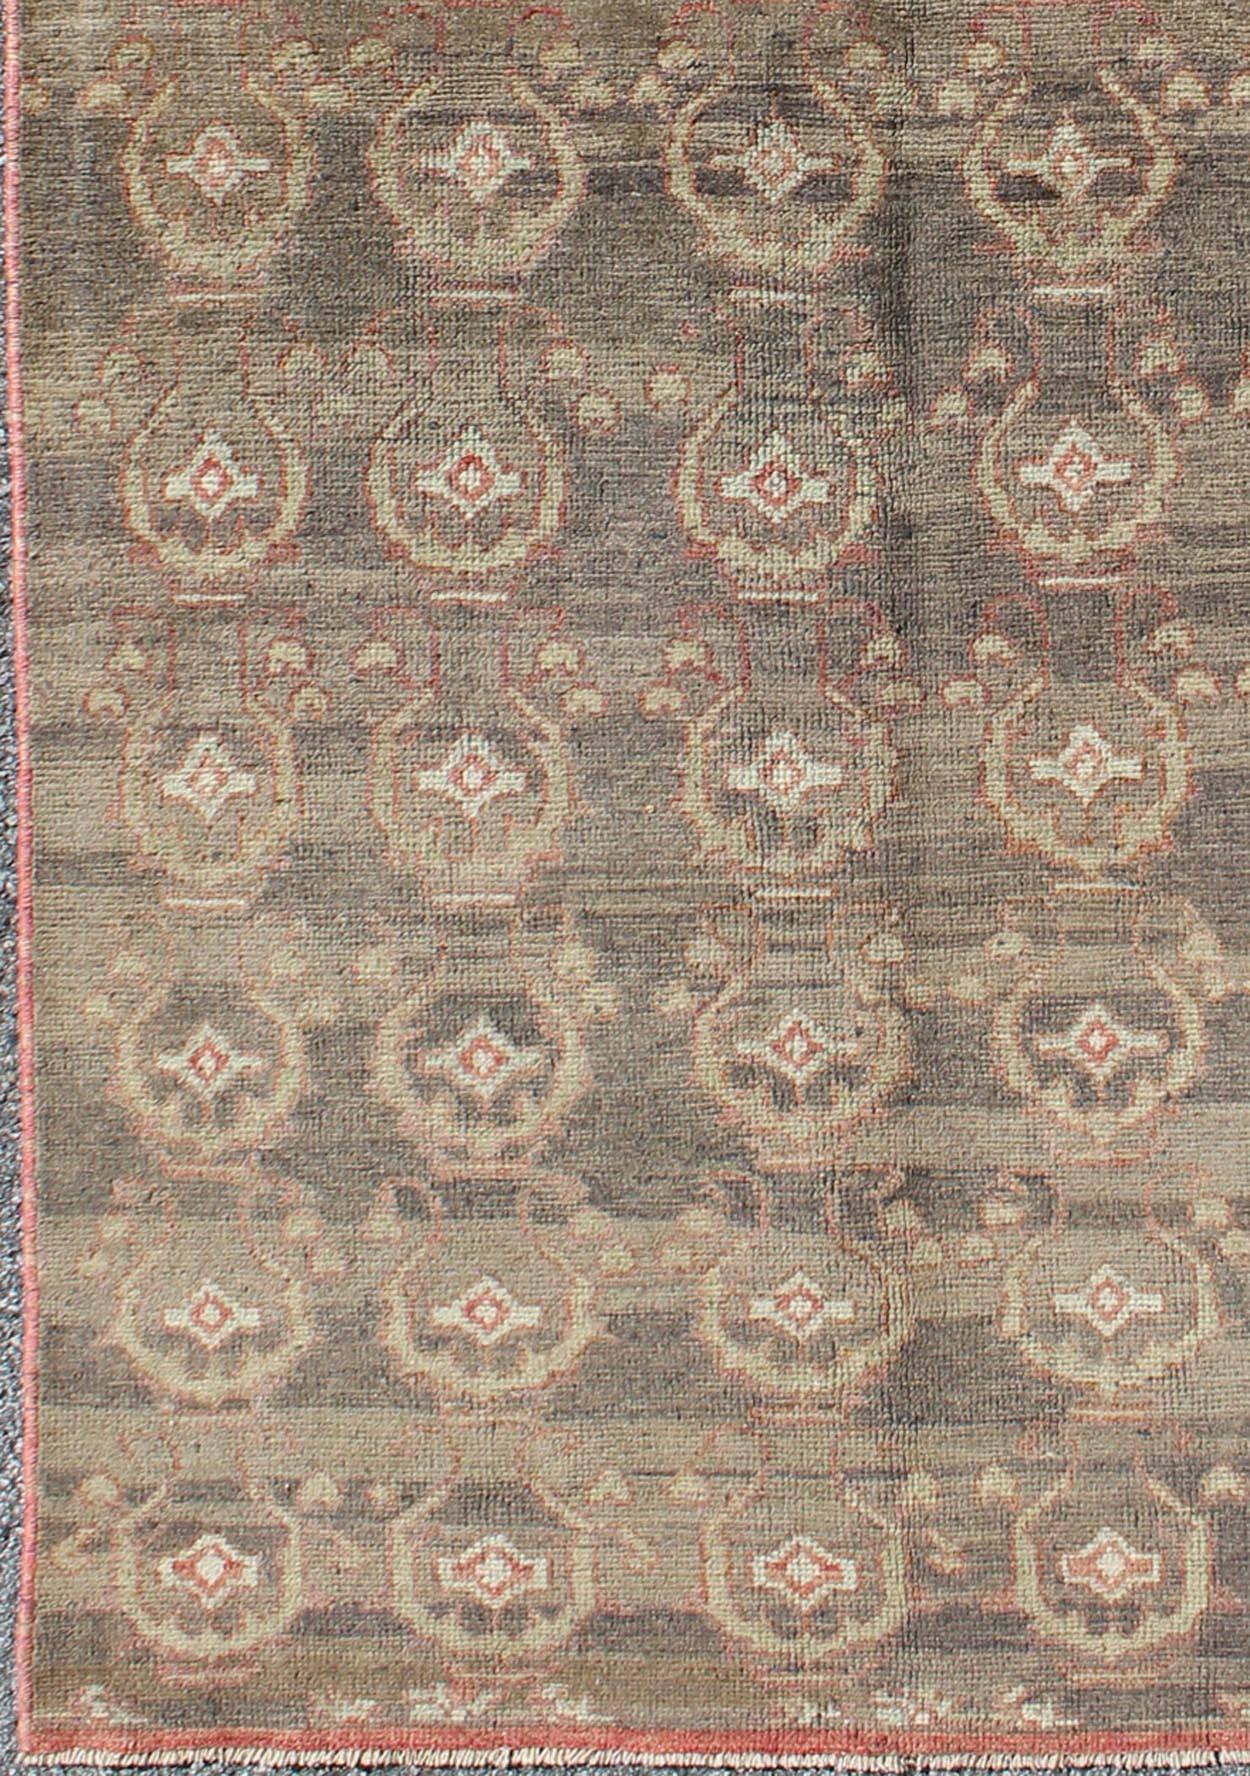 Gray vintage Turkish Oushak rug with all-over blossom design in soft red and light 0green , rug en-140879, country of origin type: Turkey Oushak, circa 1940

This Oushak carpet (circa mid-20th century) features an all-over pattern of